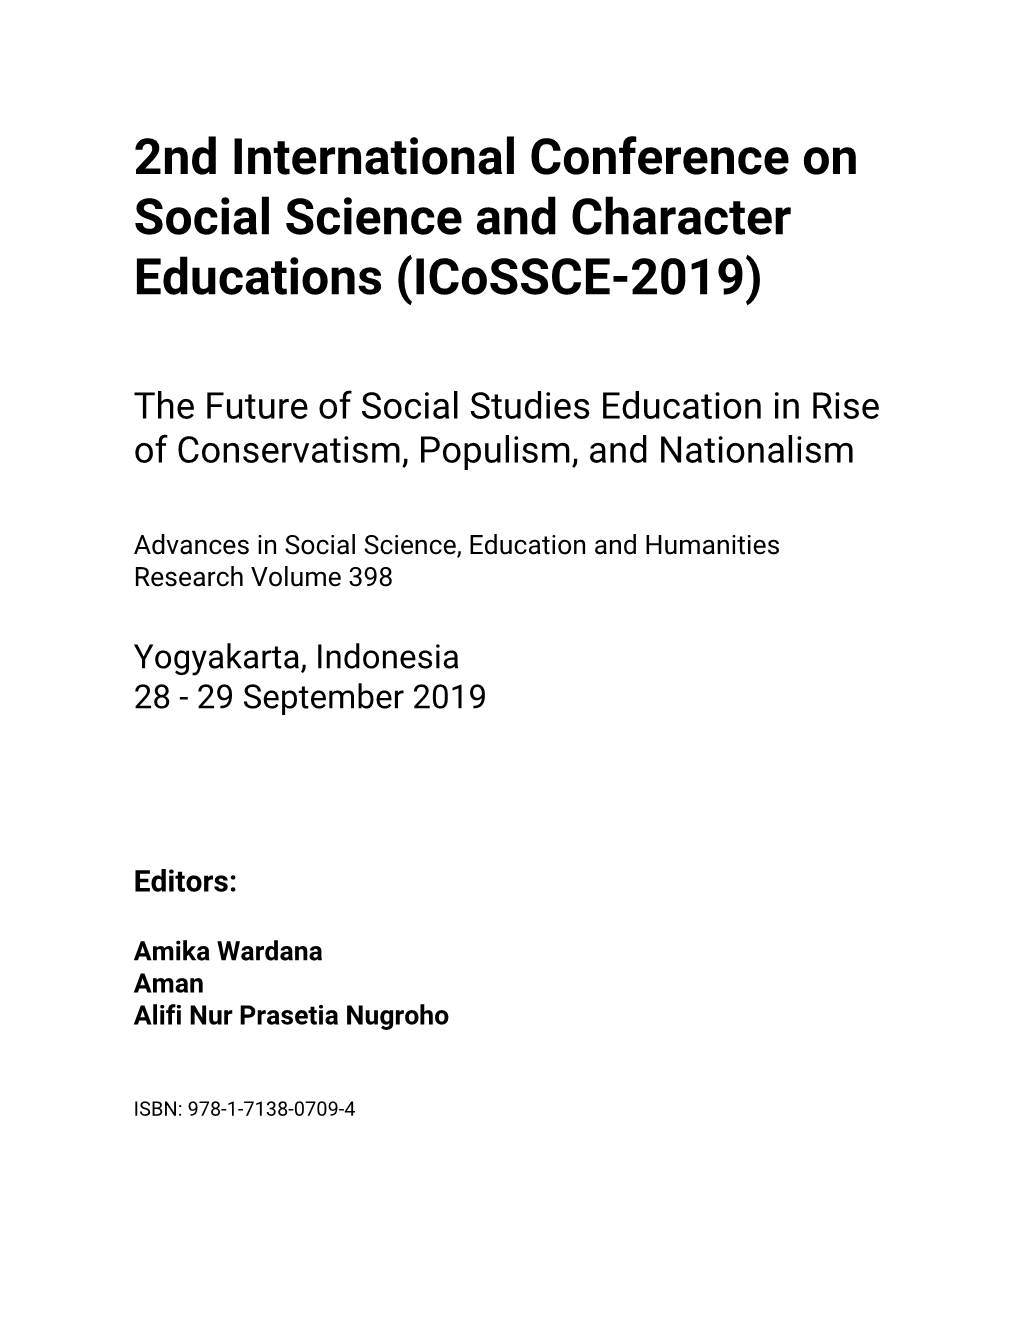 2Nd International Conference on Social Science and Character